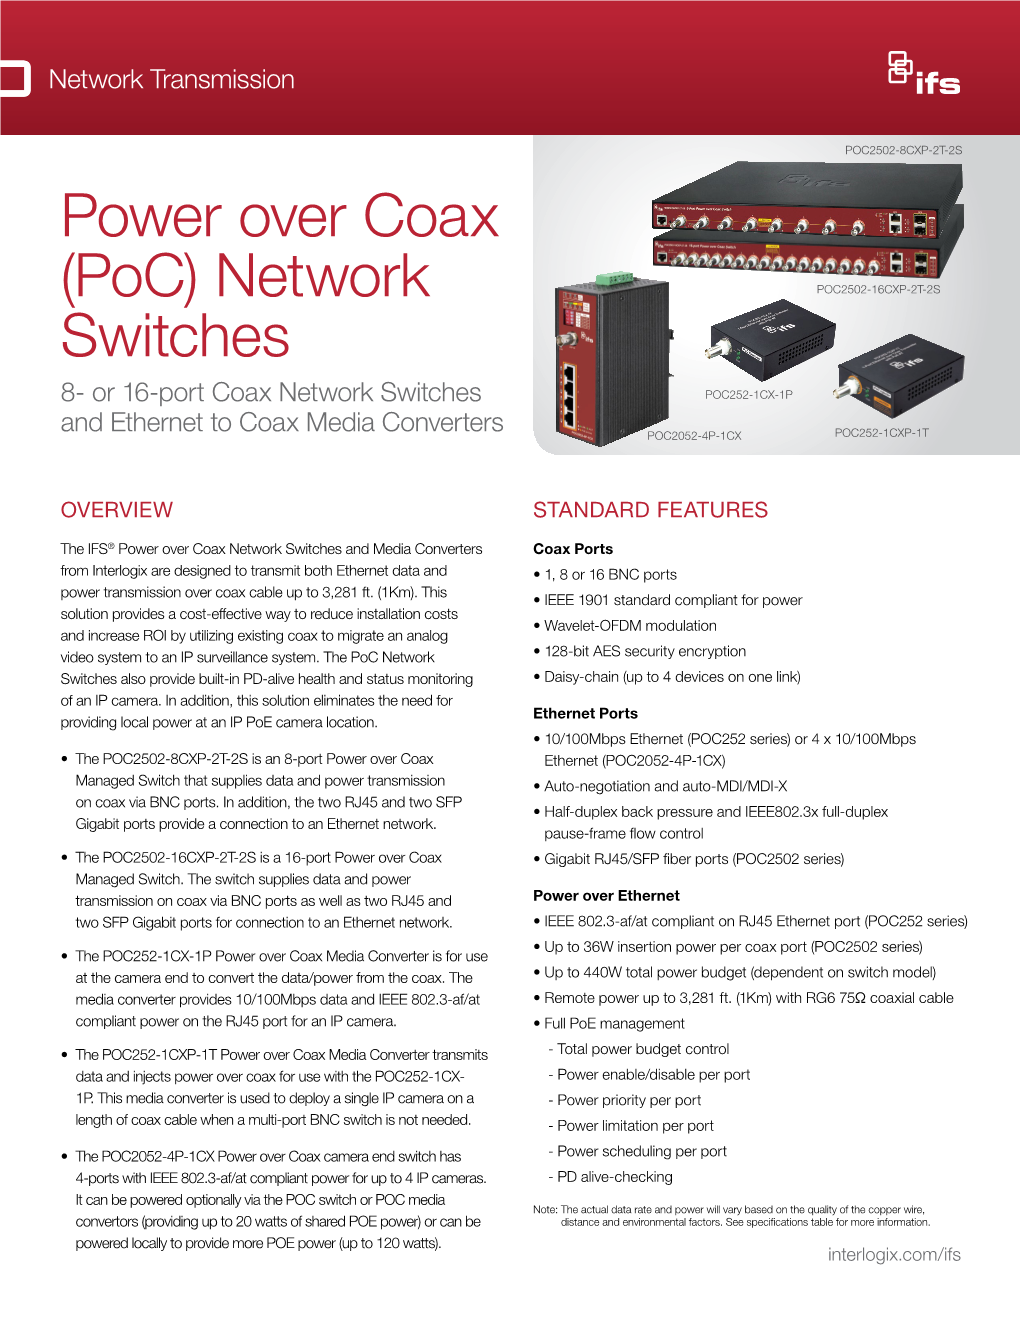 Power Over Coax (Poc) Network Switches 8- Or 16-Port Coax Network Switches and Ethernet to Coax Media Converters